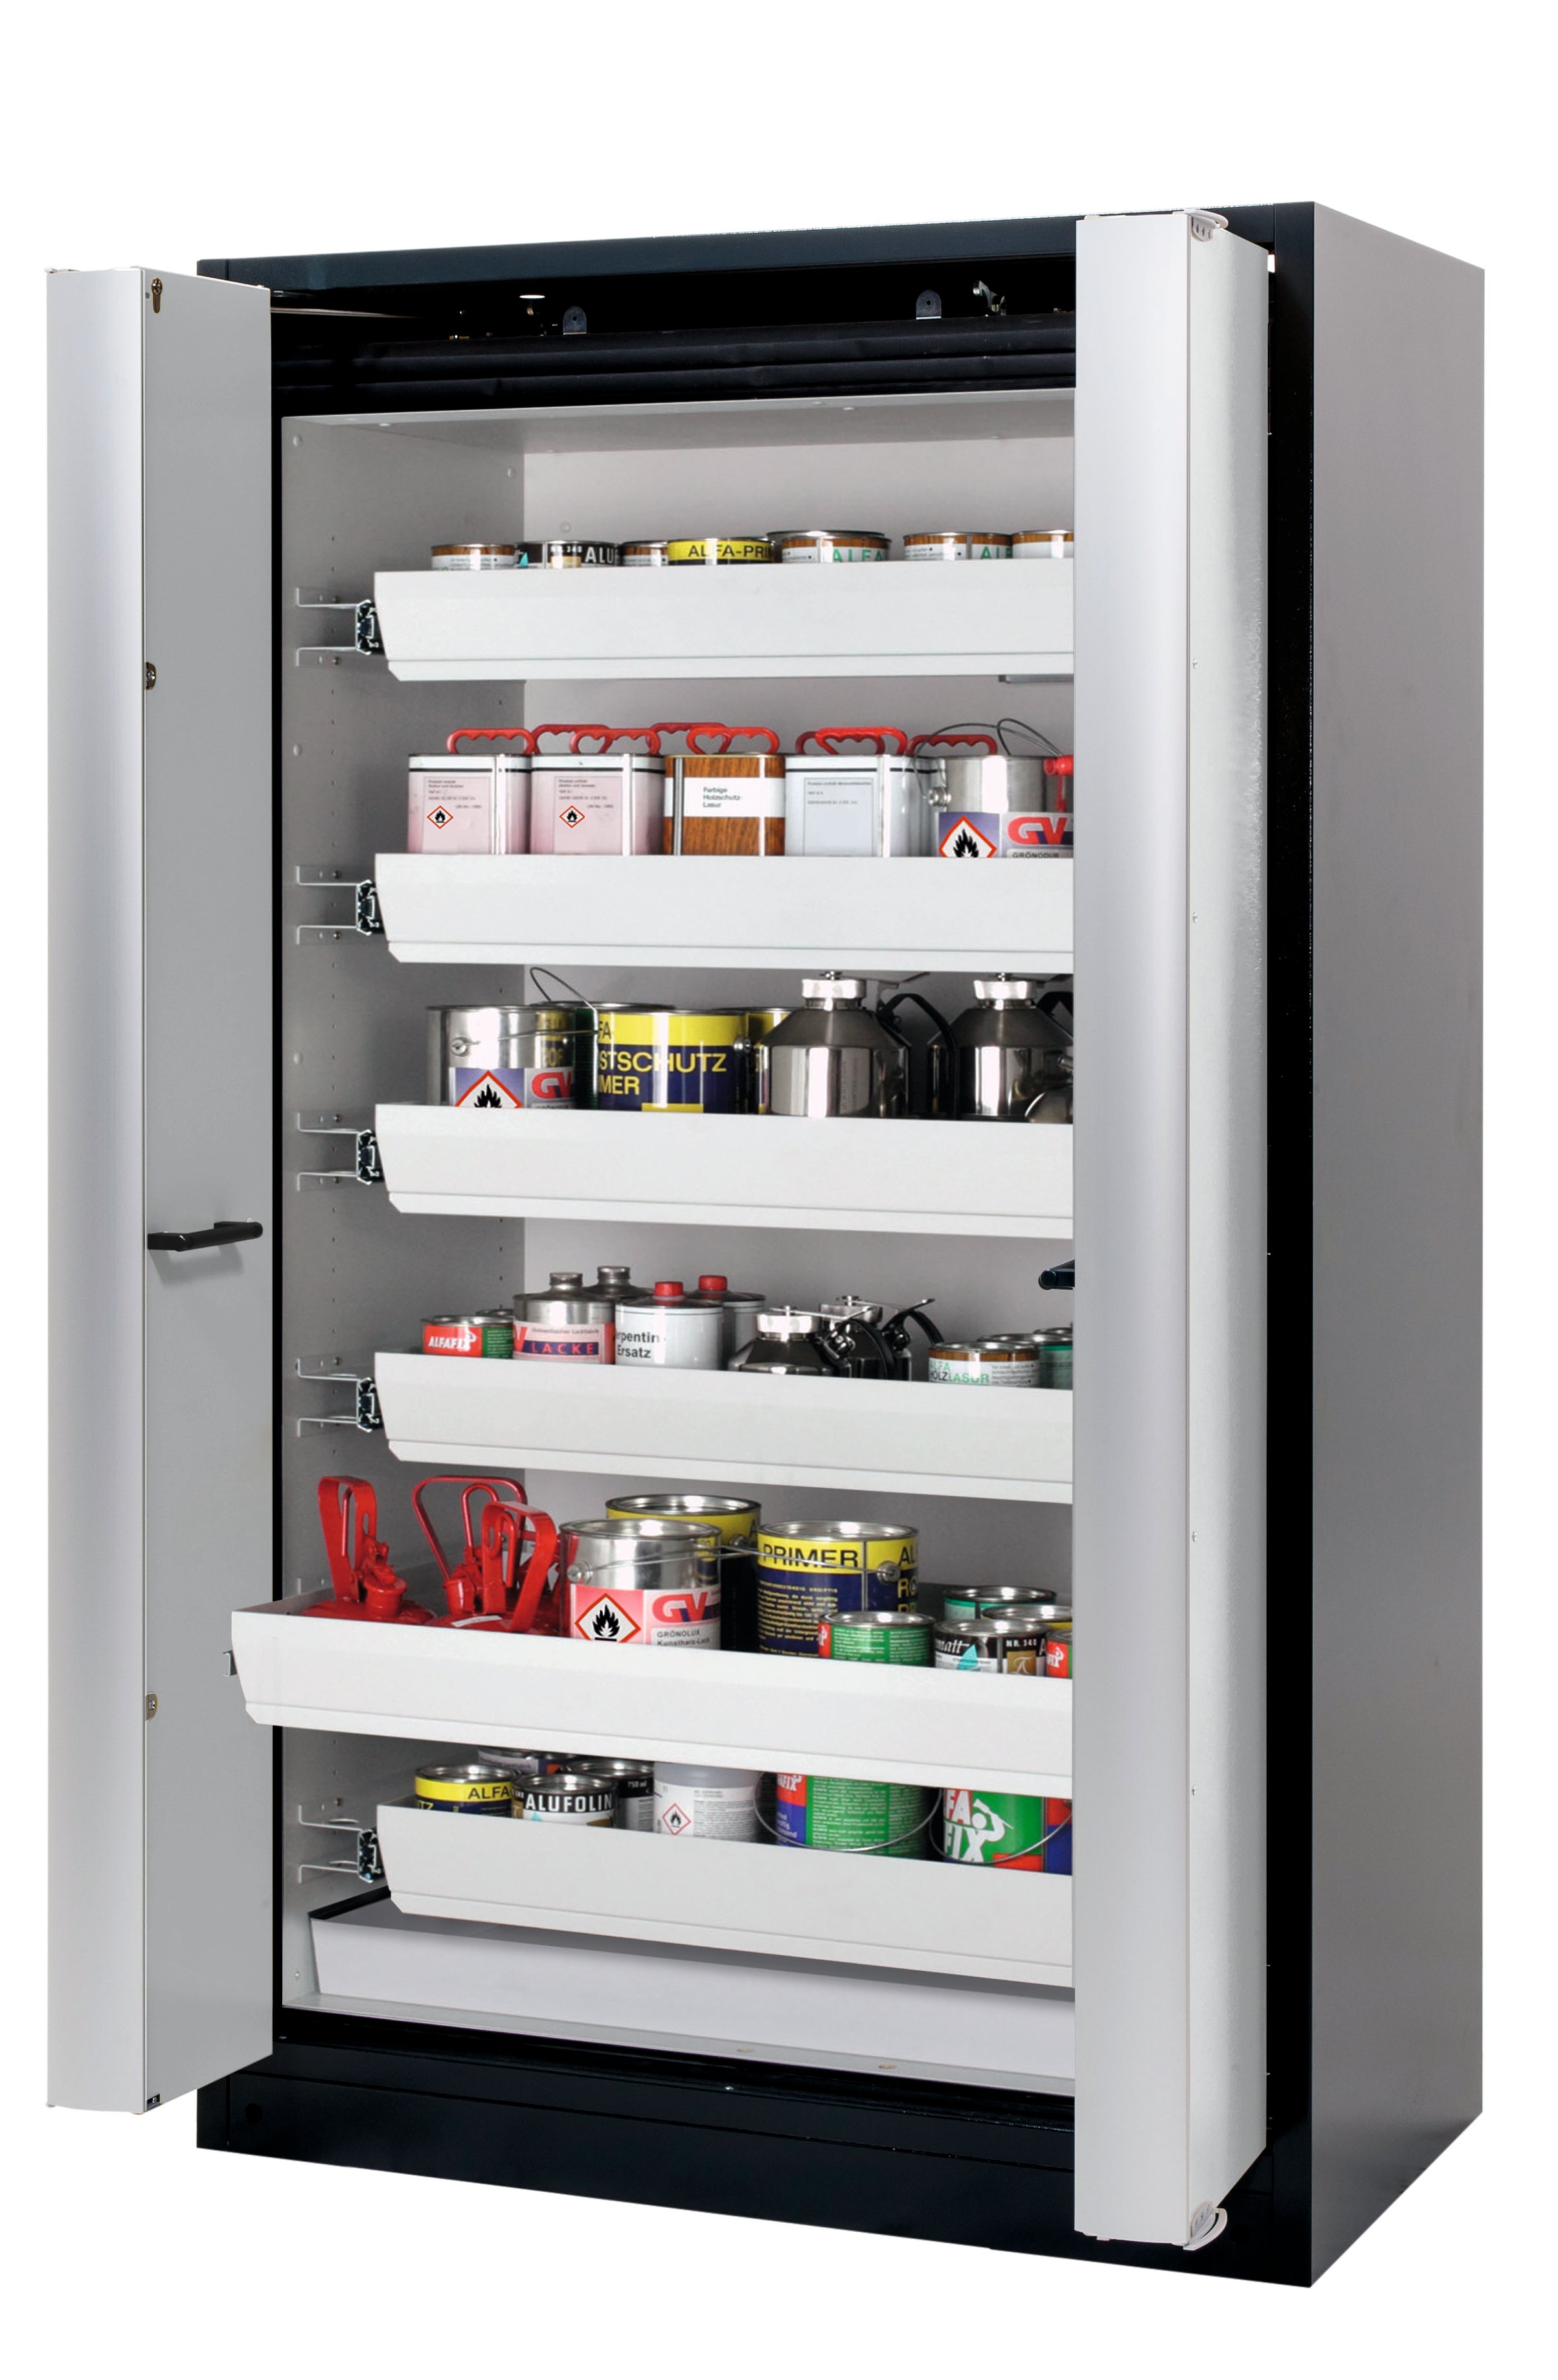 Type 90 safety cabinet Q-PHOENIX-90 model Q90.195.120.FD in light gray RAL 7035 with 6x standard pull-out tray (sheet steel)